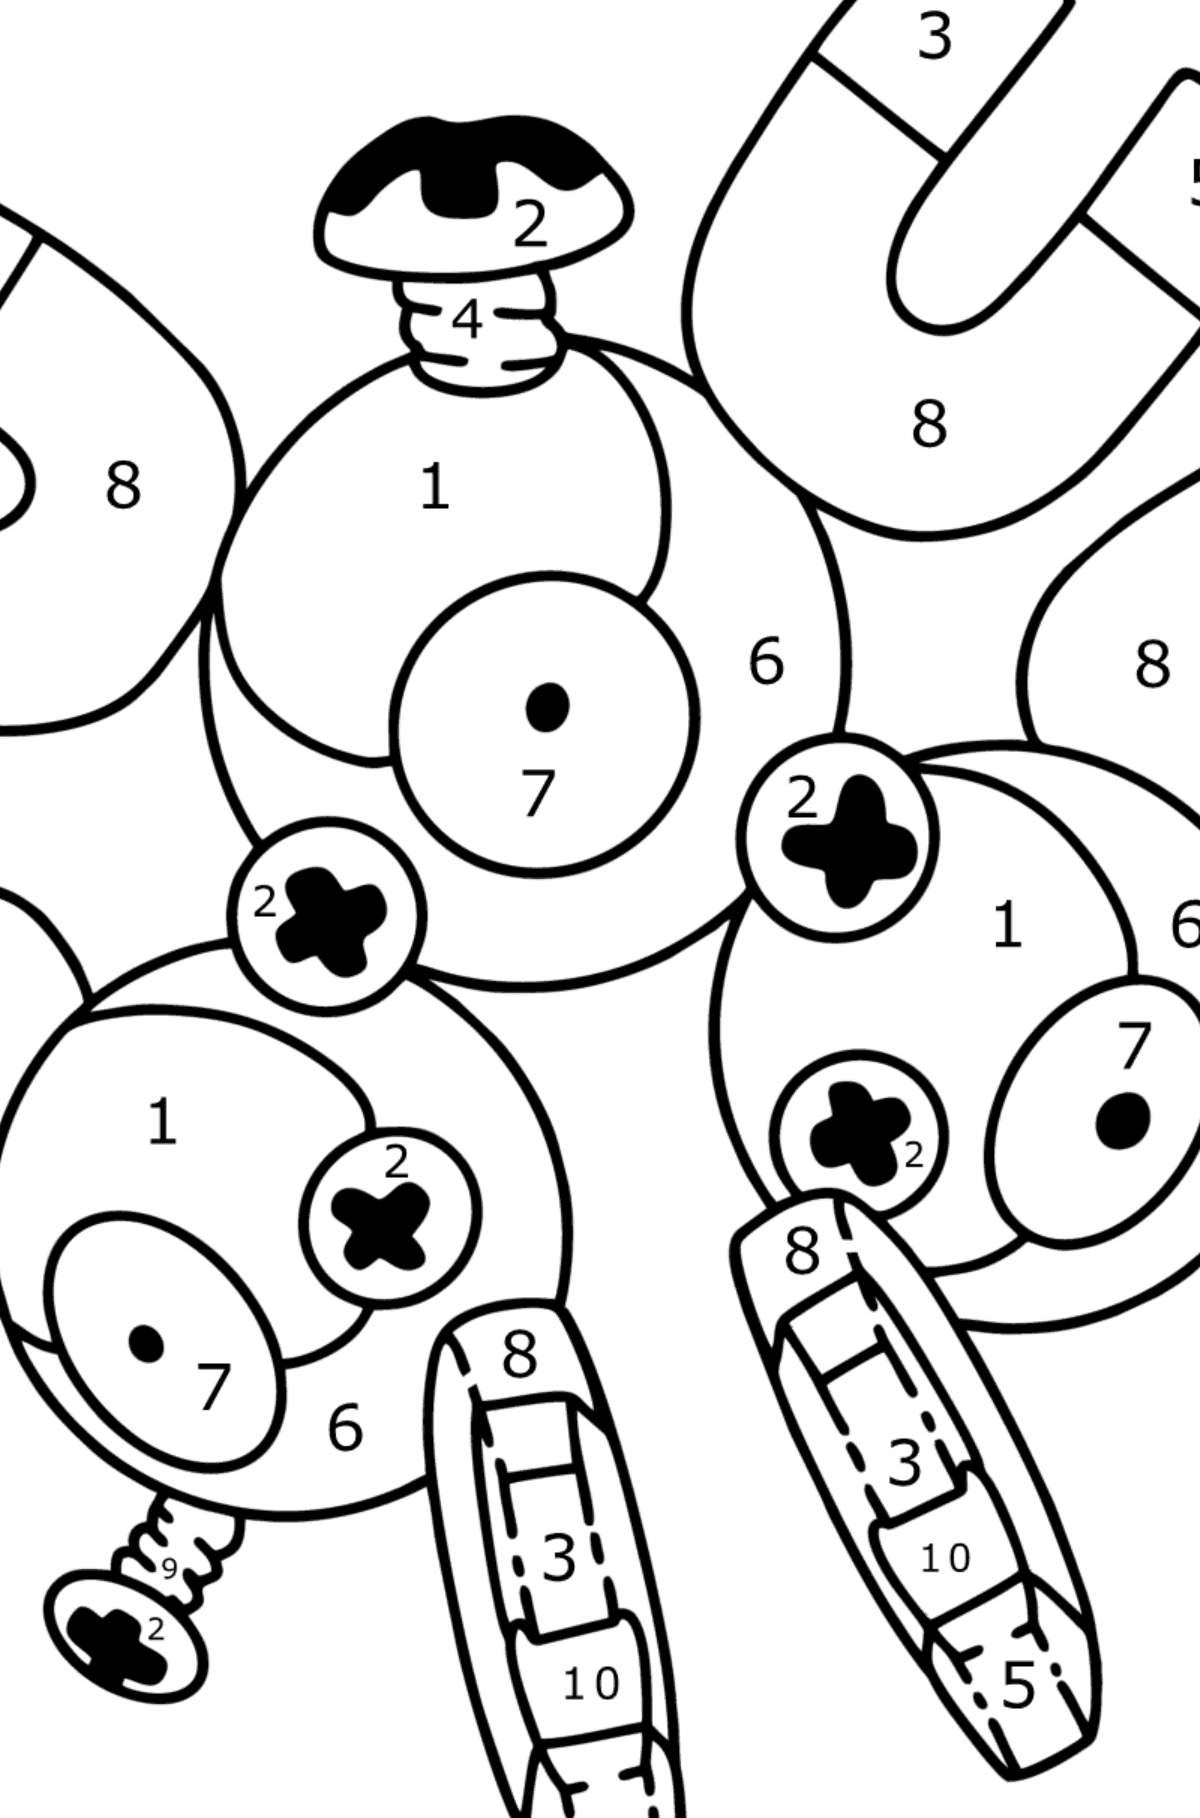 Coloring page Pokémon Go Magneton - Coloring by Numbers for Kids